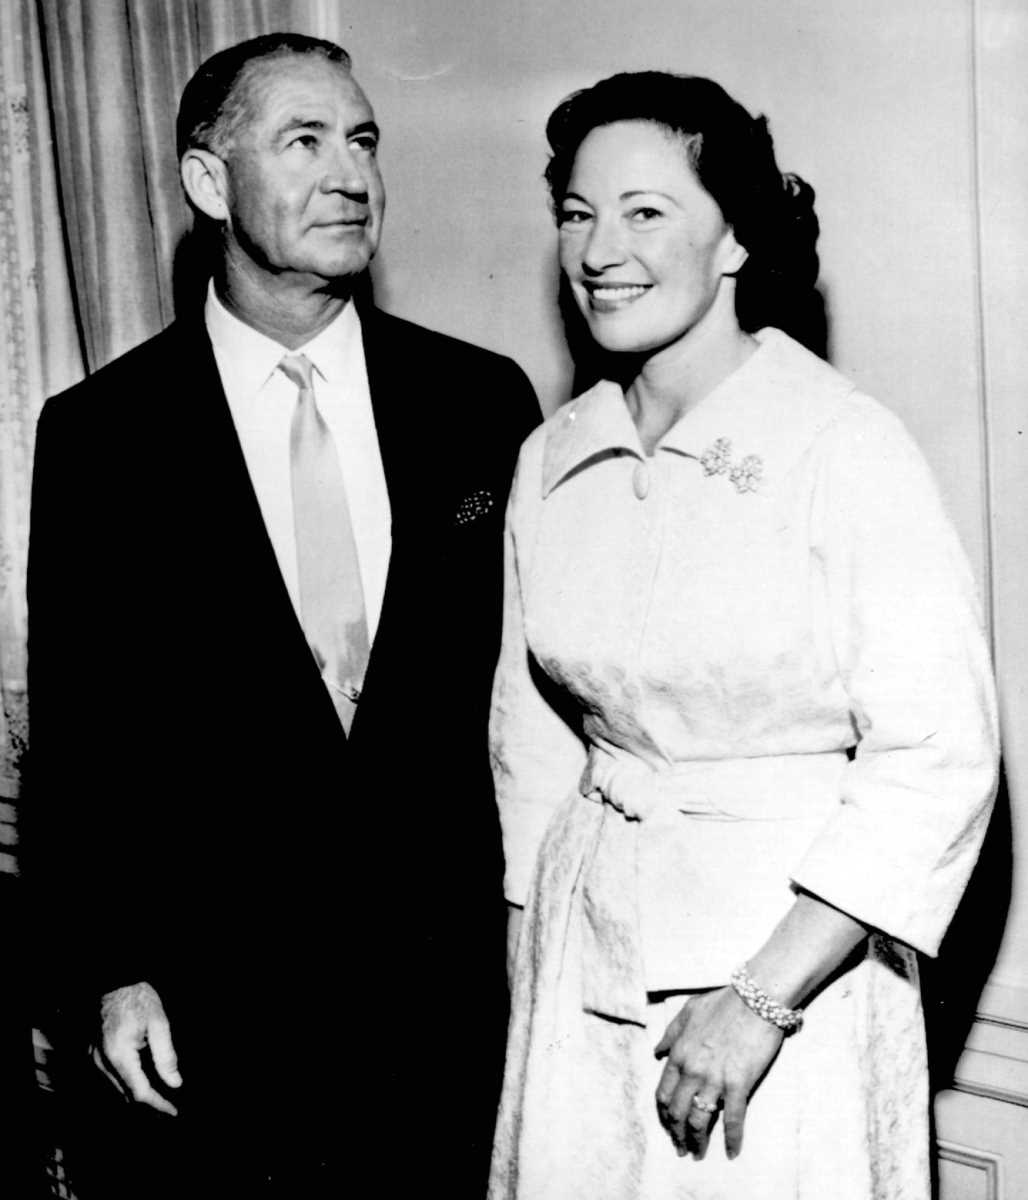 Mr. and Mrs. George L. Coleman on their wedding day in November 1959